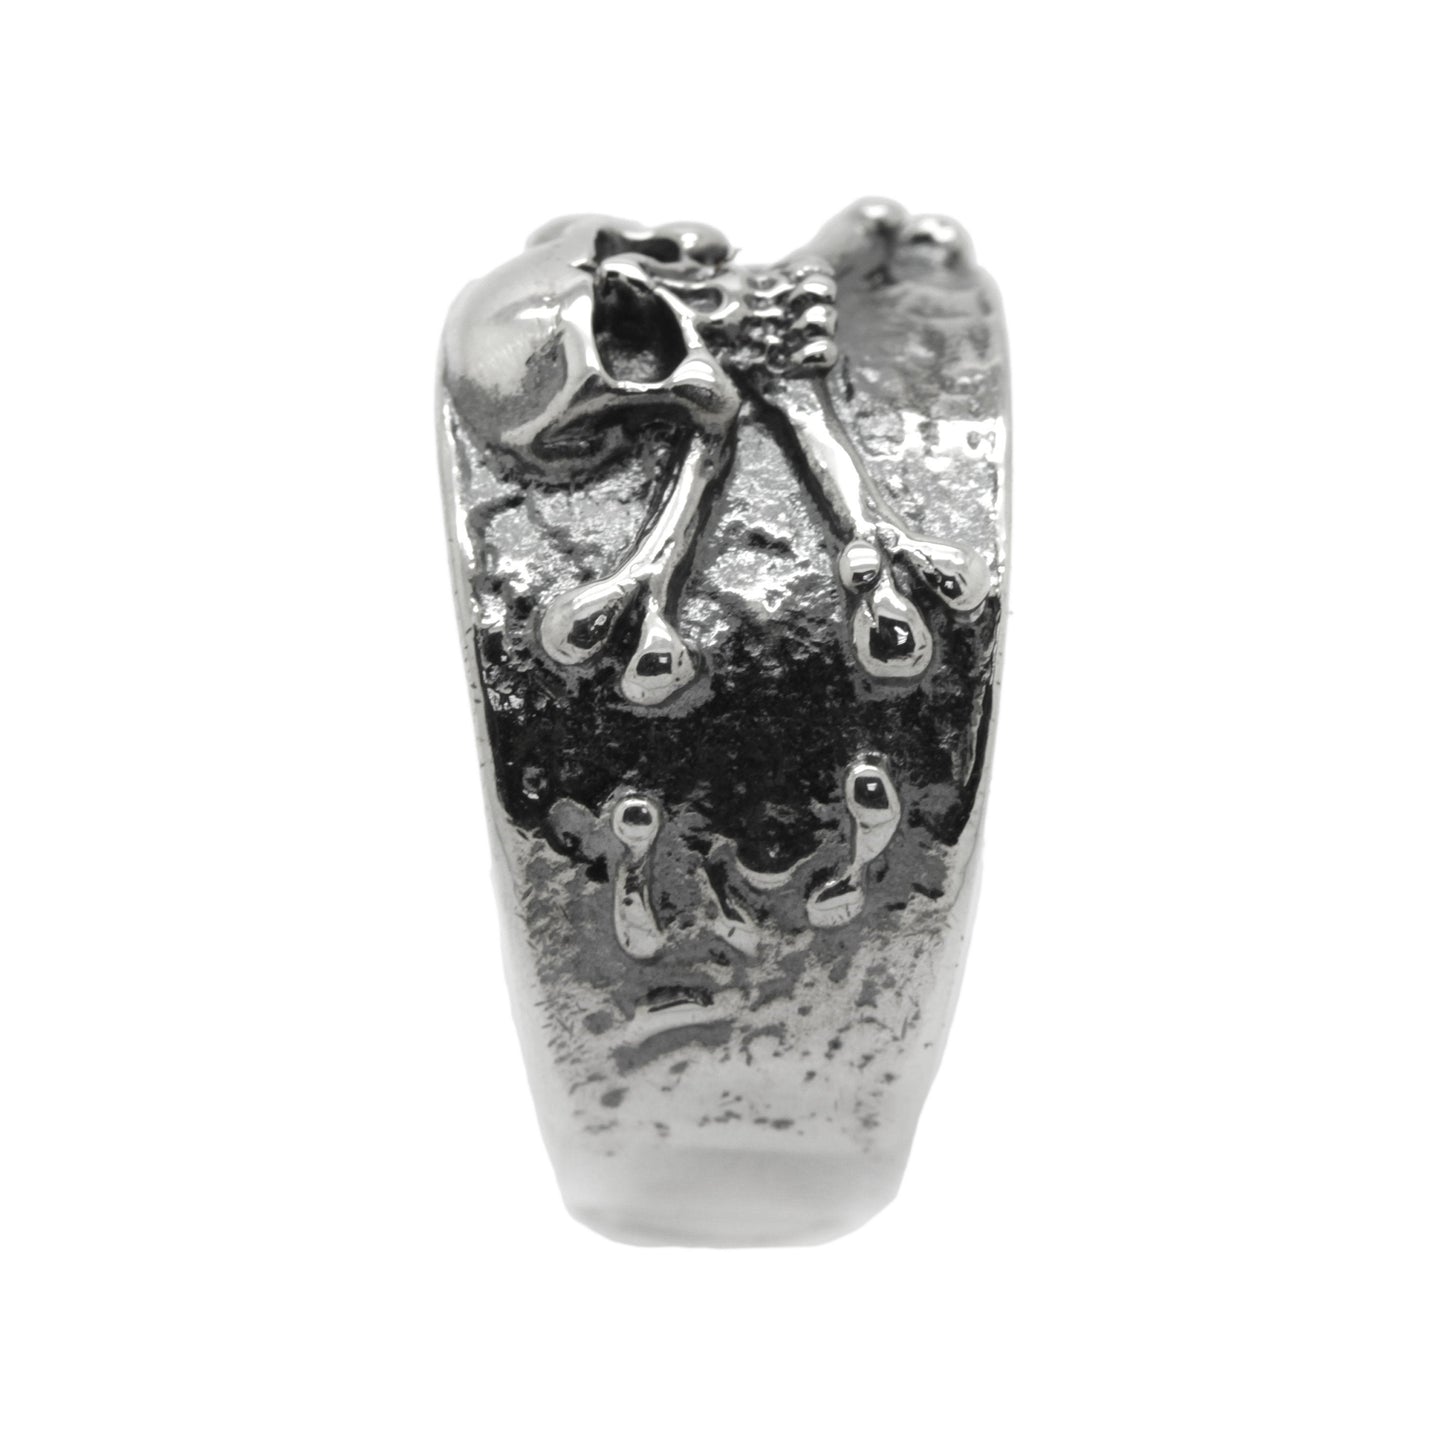 A Huge Skull and Bones Band Mens Silver Ring, Jolly Roger Pirate Ring Men